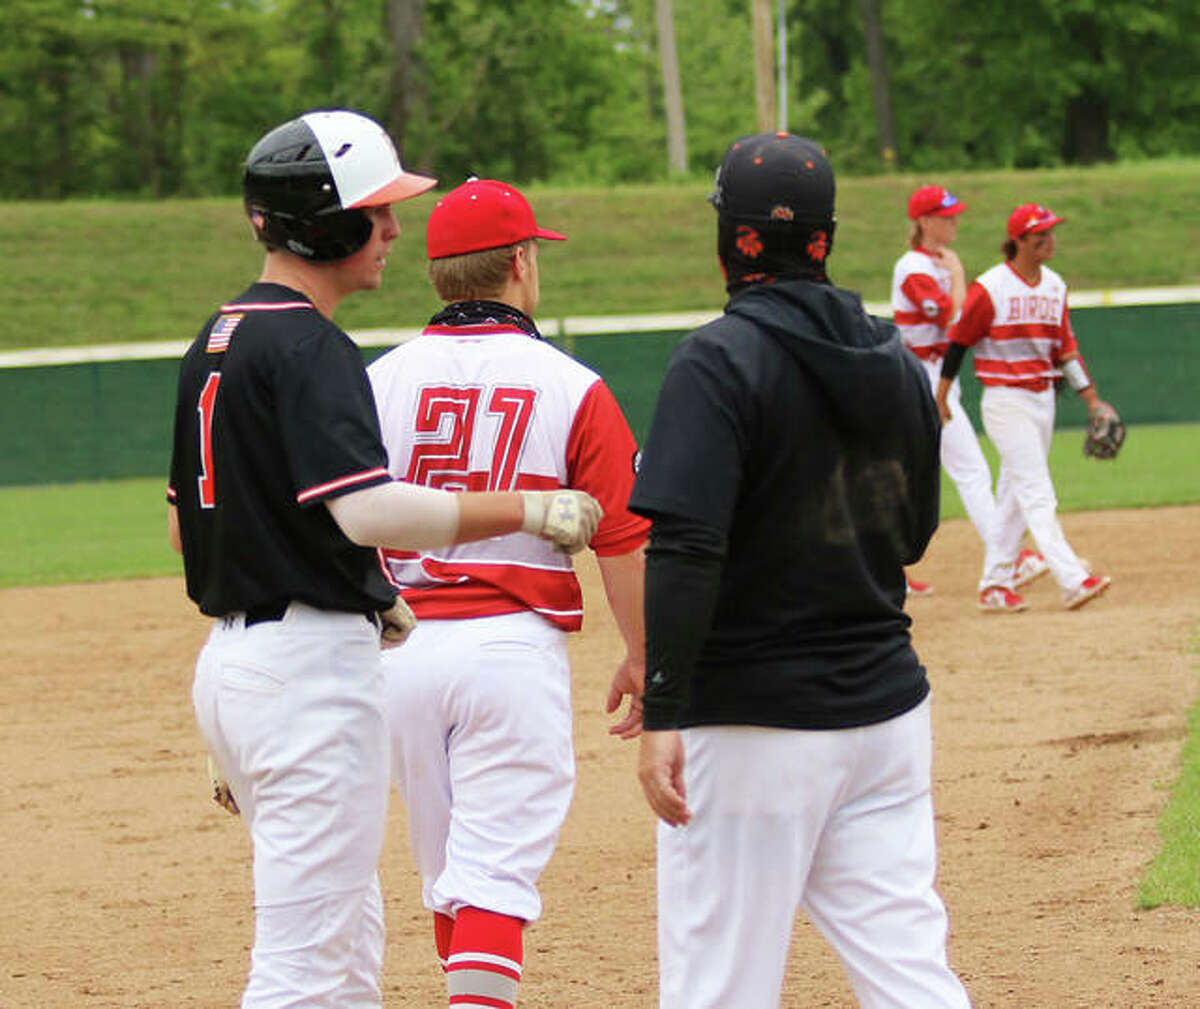 Edwardsville coach Tim Funkhouser gets a fist bump from his son and Tigers shortstop Evan Funkhouser at third base during a game last season at Alton High in Alton.